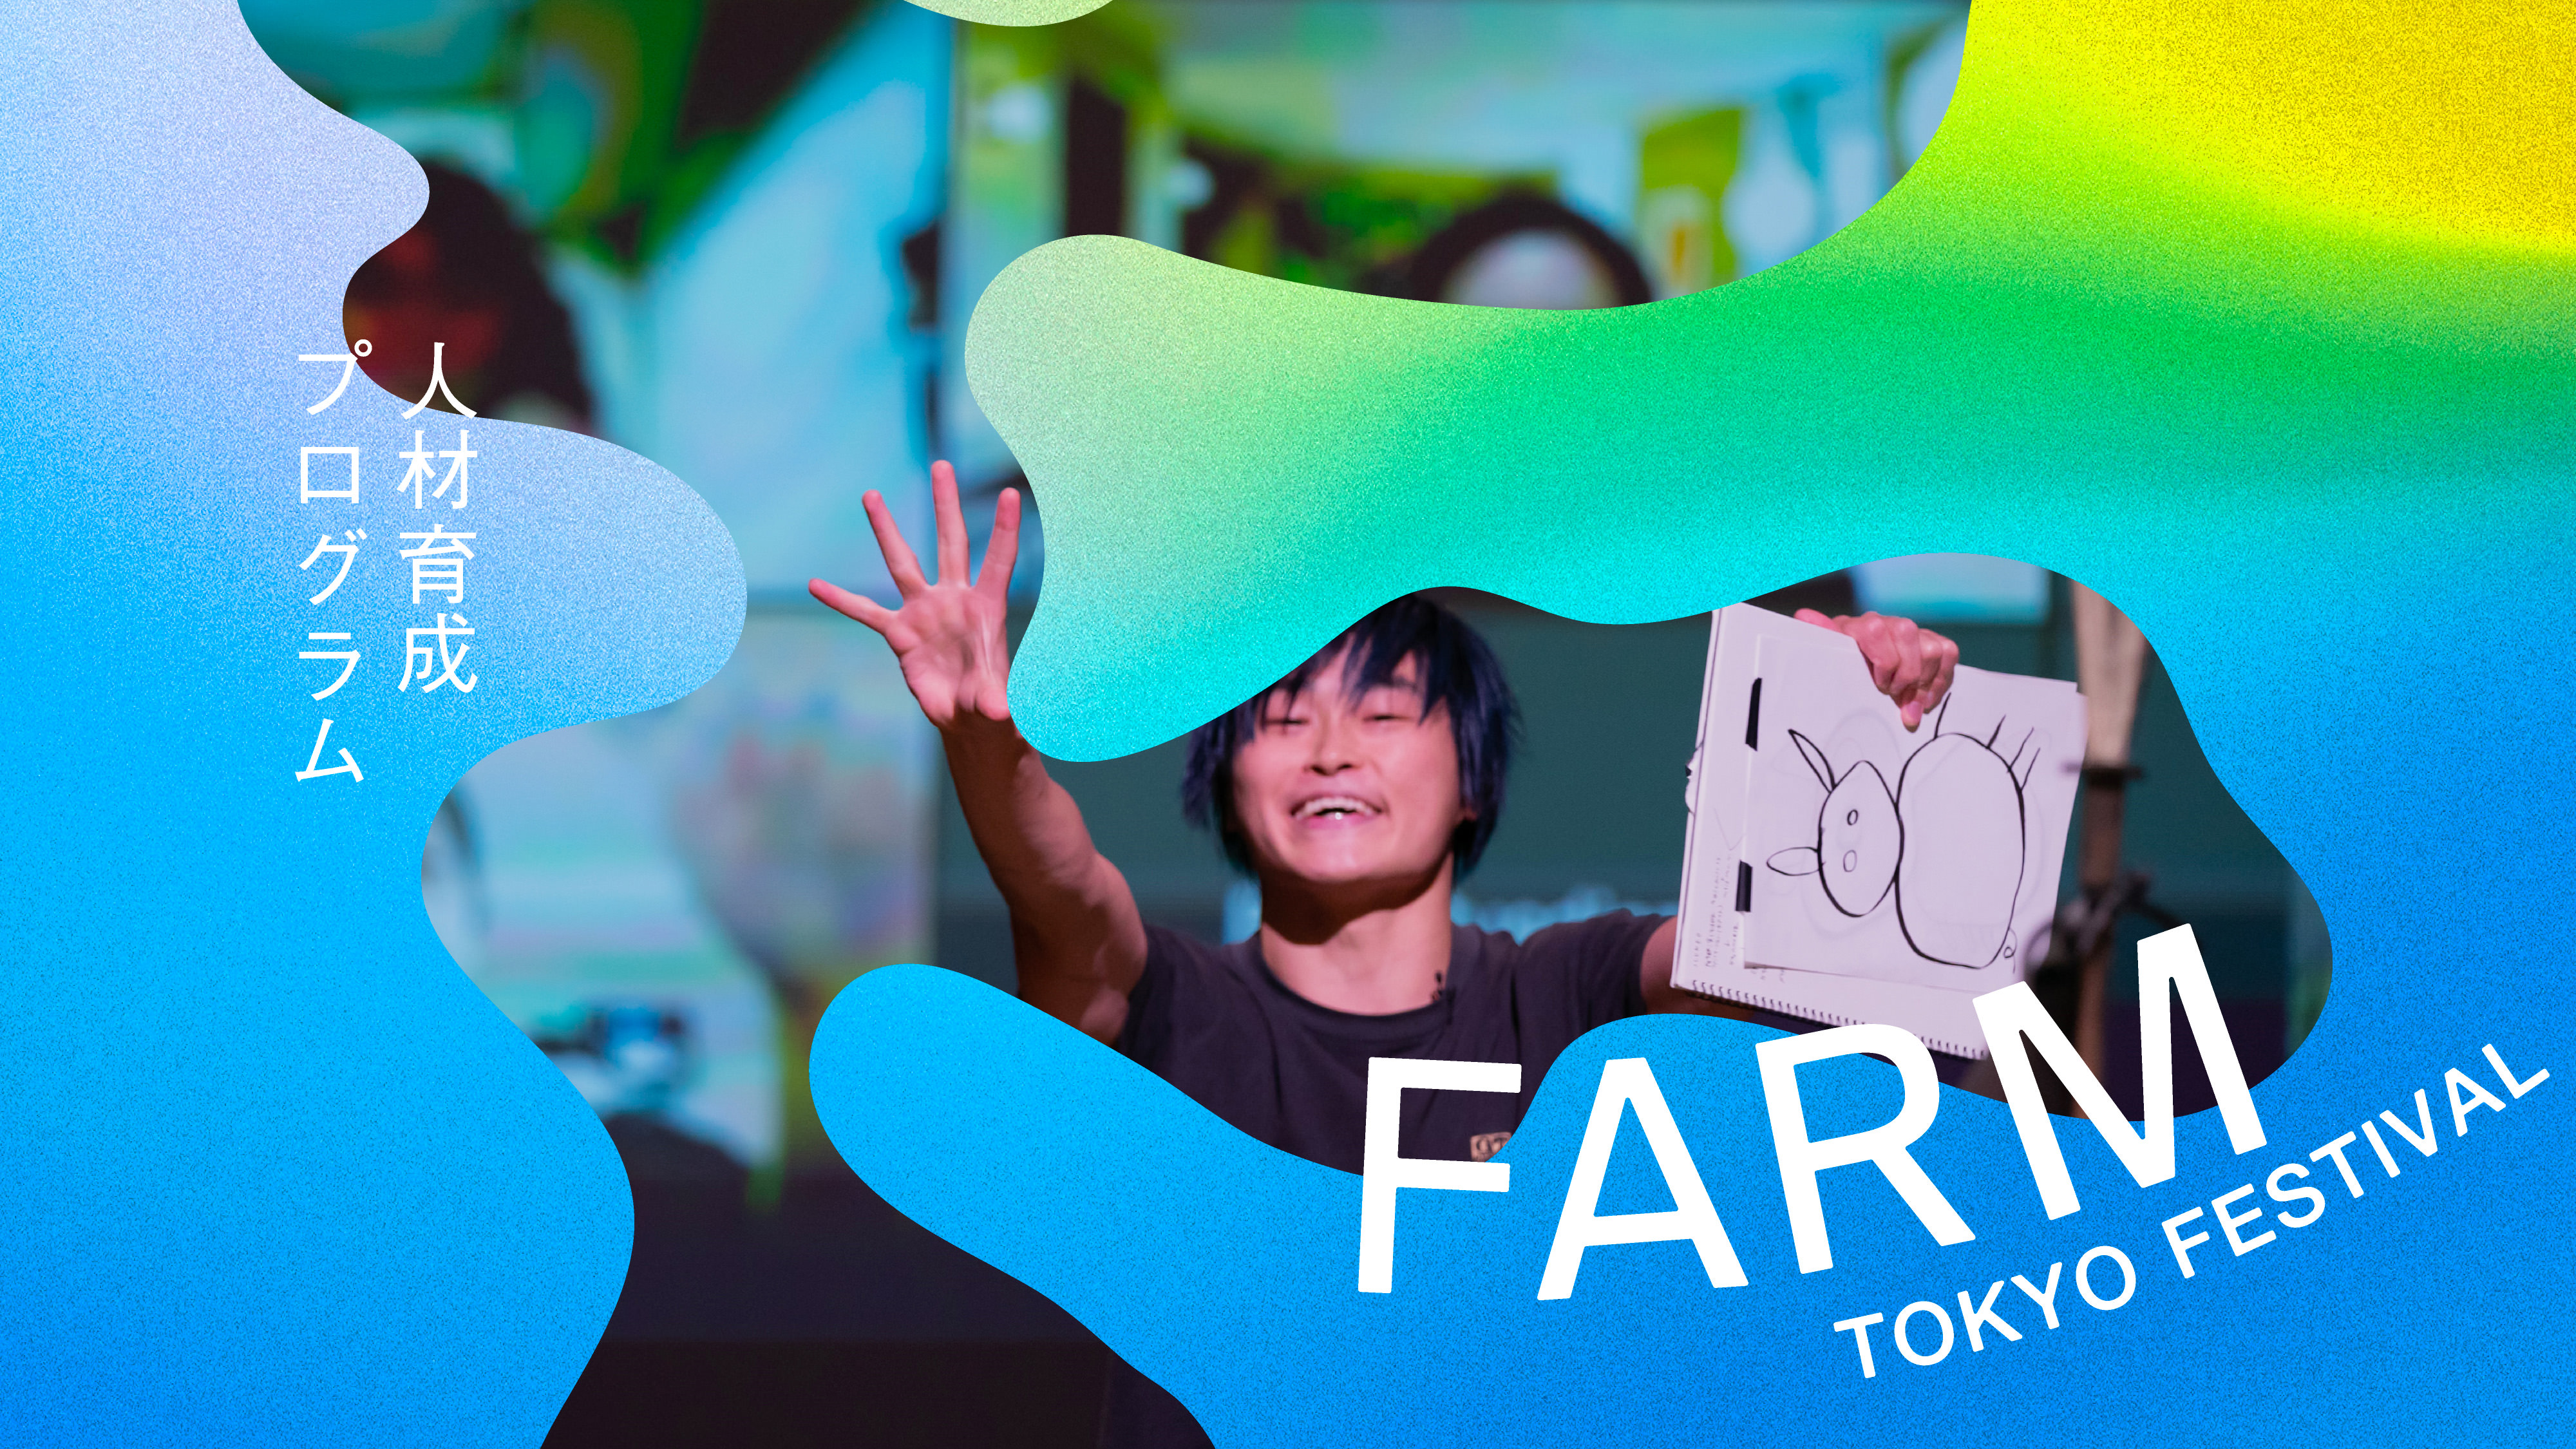 TOKYO FESTIVAL FARM Training opportunities Get involved with the performing arts